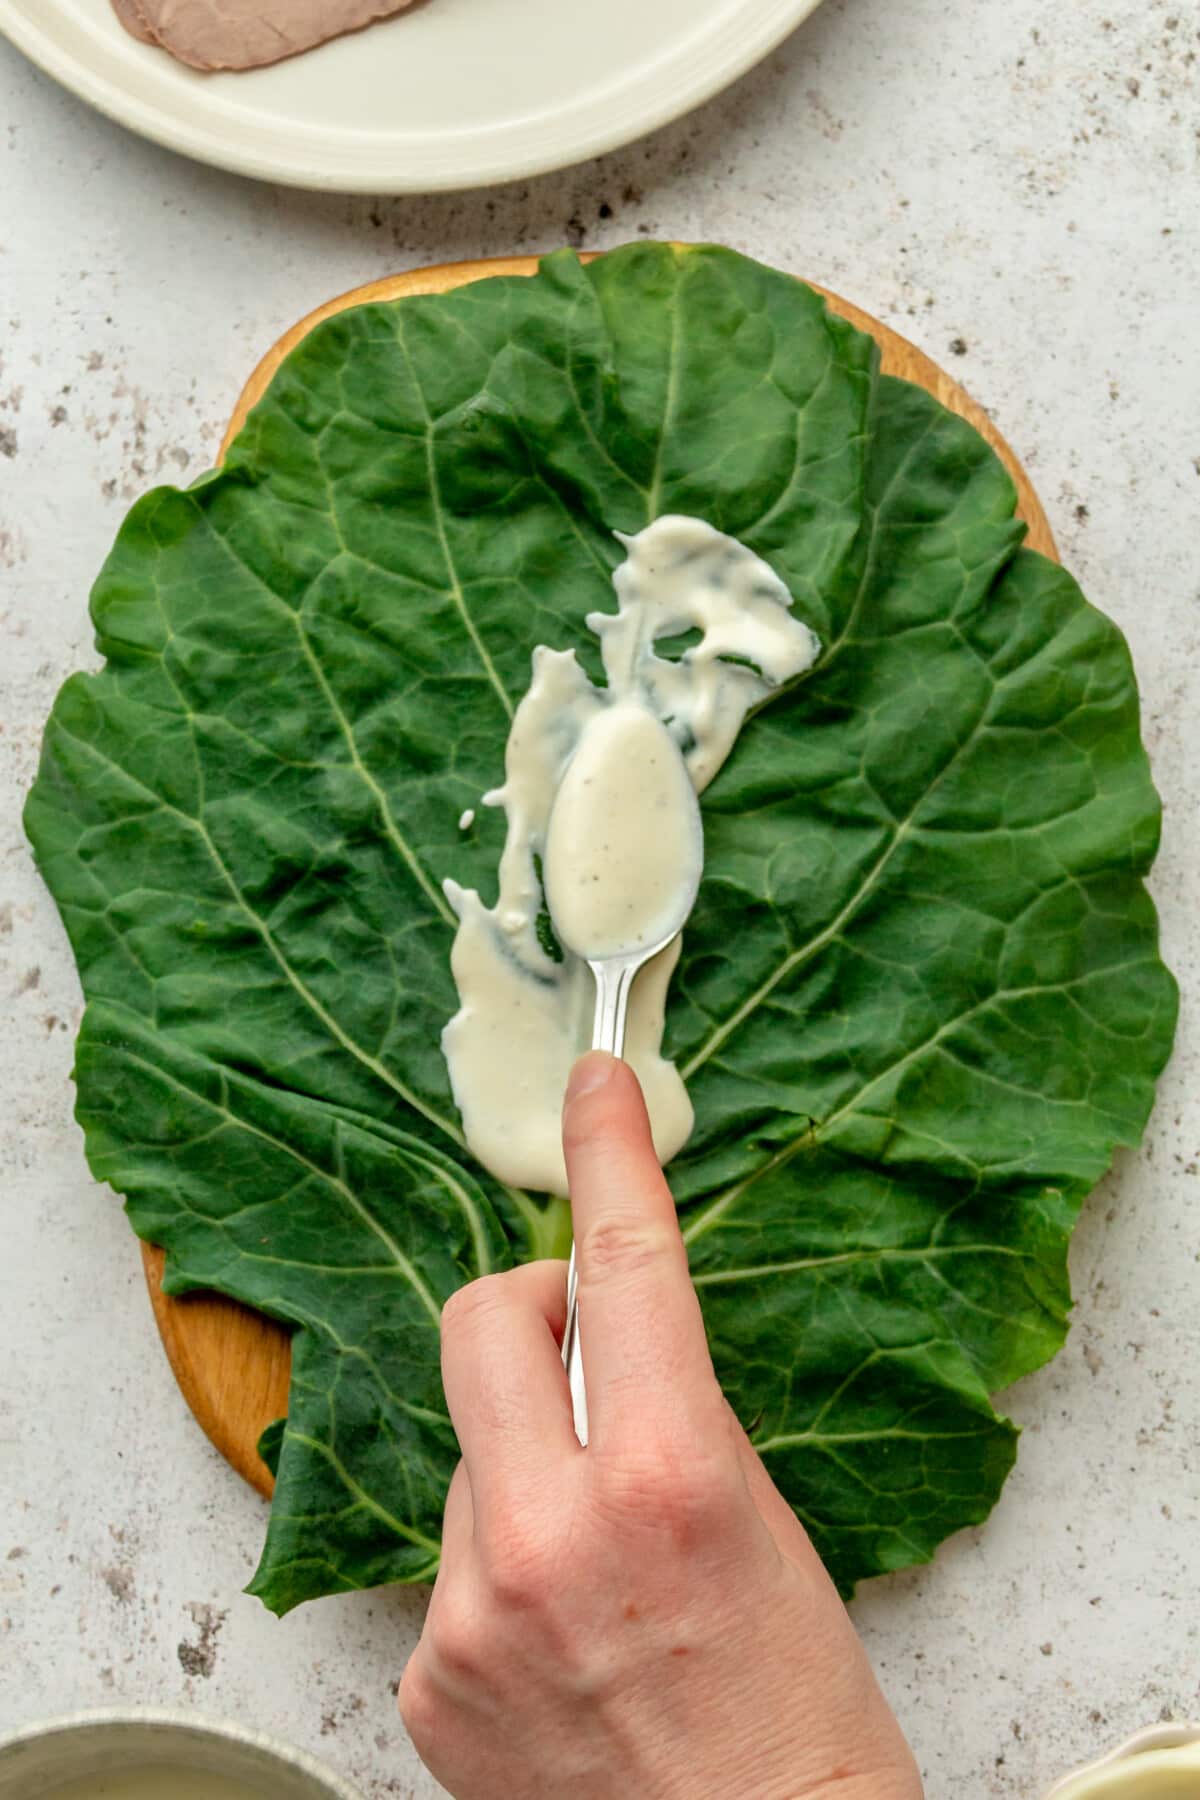 A horseradish sauce is smeared over a collard green leaf on a wood board on a light grey surface.